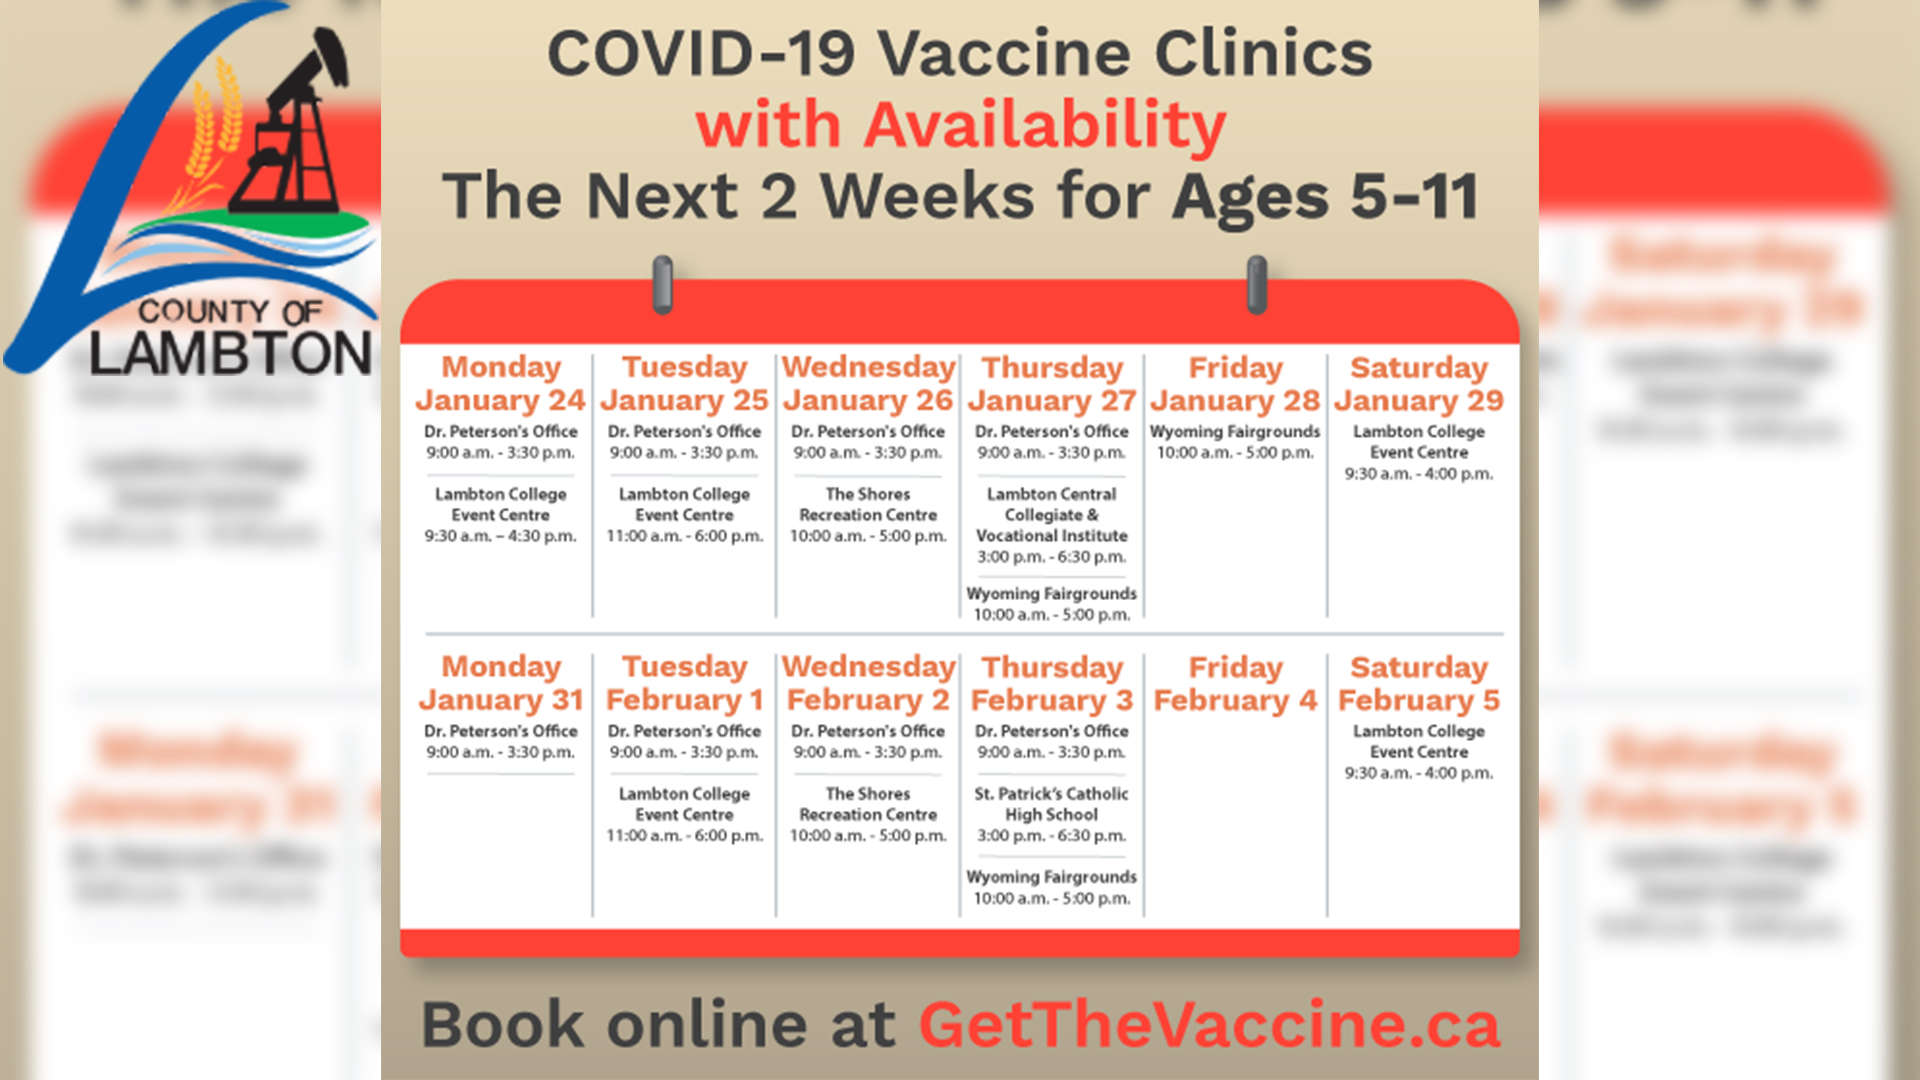 Important Information from Lambton Public Health Regarding COVID-19 Vaccination Clinics for 5 to 11 Year Olds